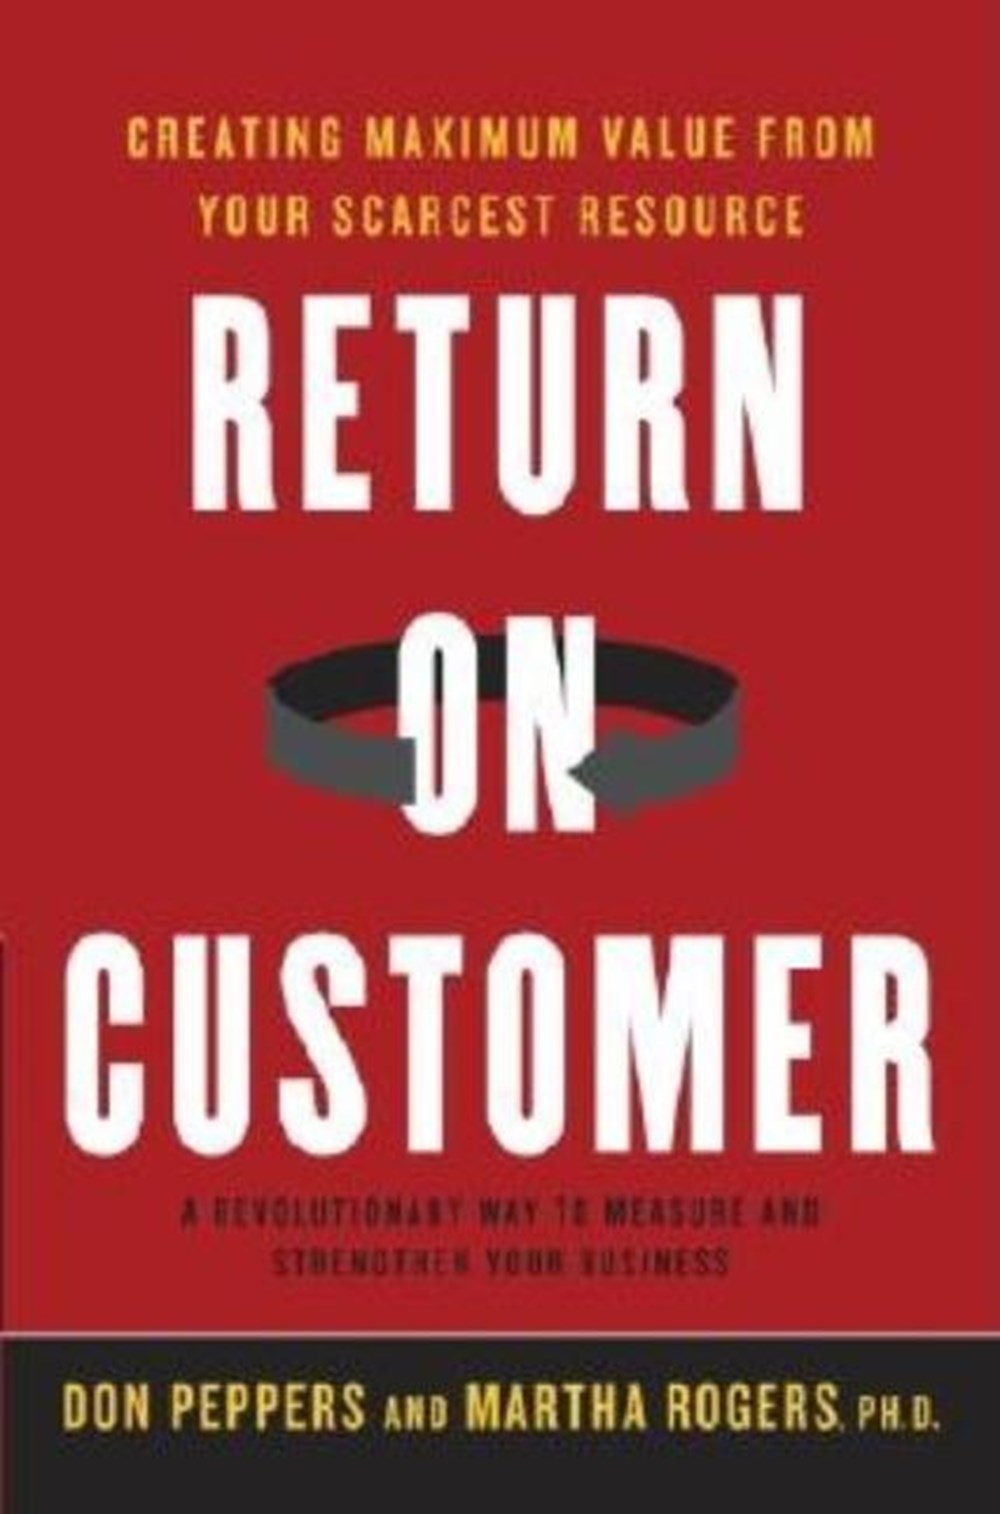 Return on Customer Creating Maximum Value from Your Scarcest Resource